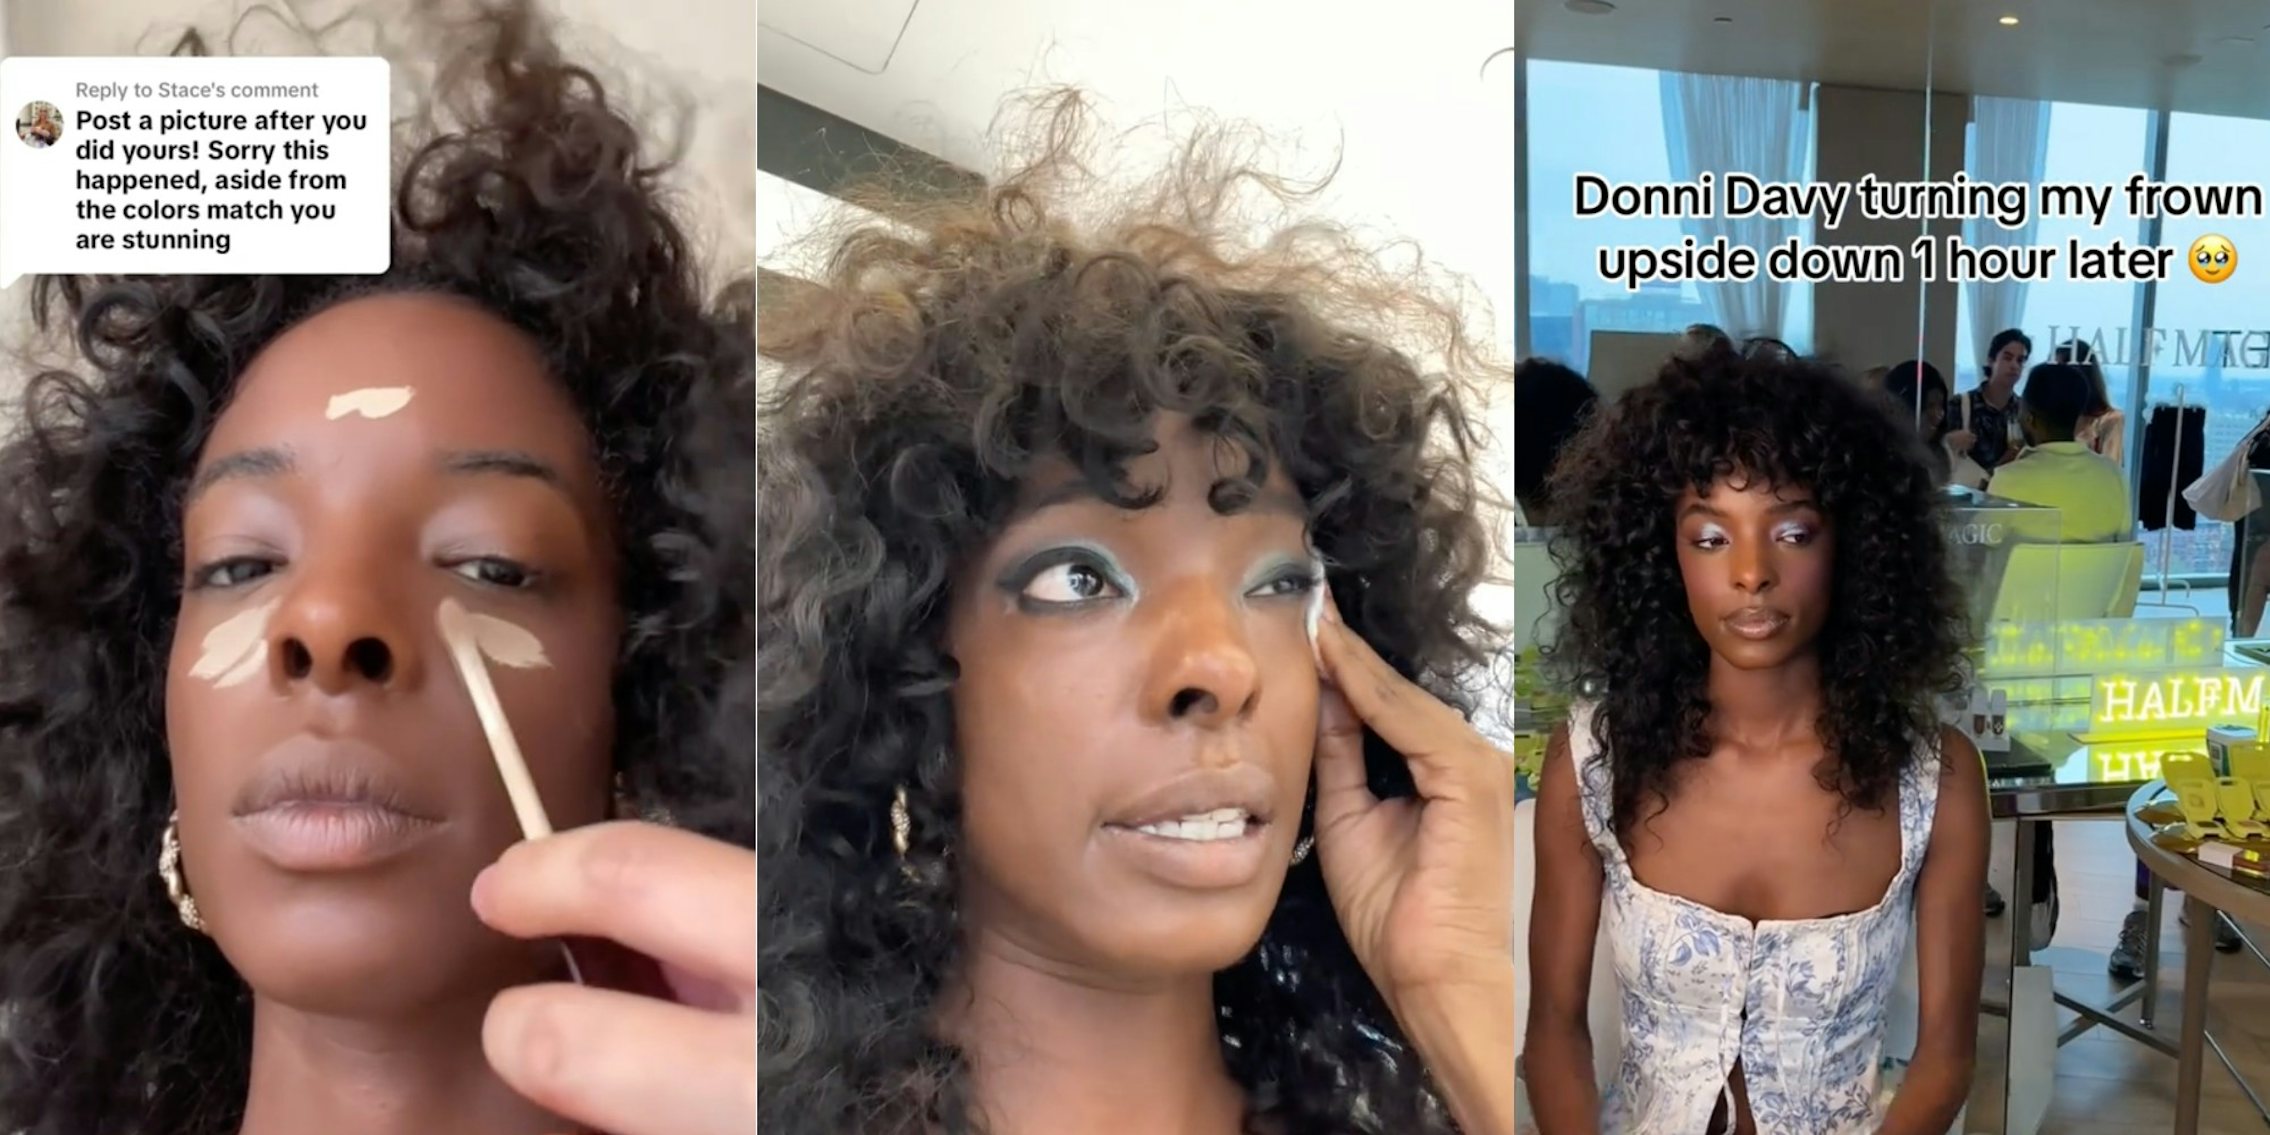 Black model redoes her makeup at New York Fashion Week after artist applies white foundation to her face.